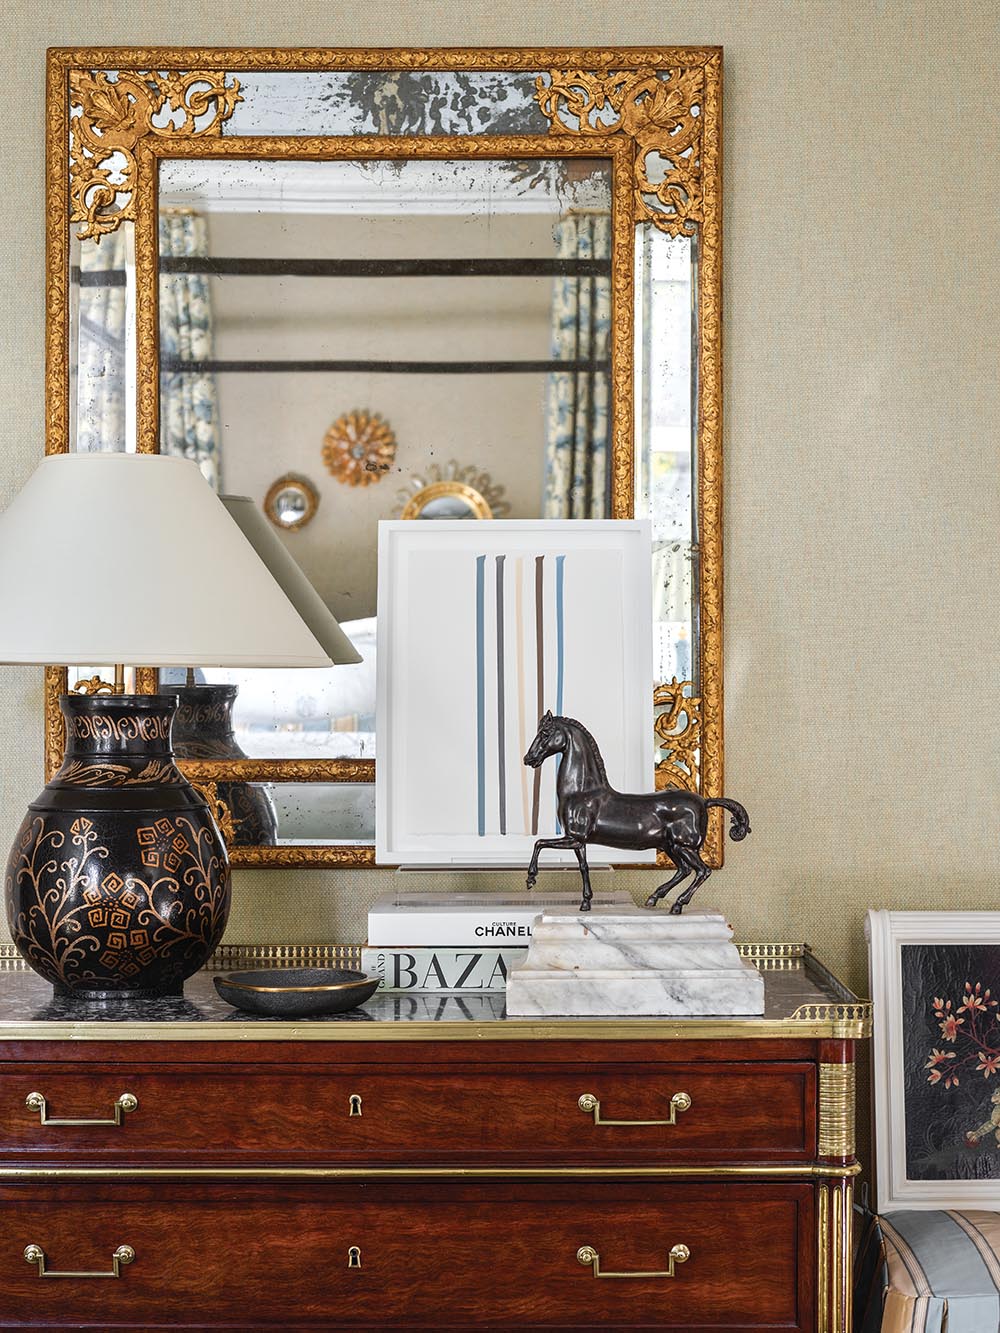 18th-century chest topped with a 19th-century bronze horse, books, a lamp, and a nail polish painting by Scott Ingram. Gold-framed mirror.